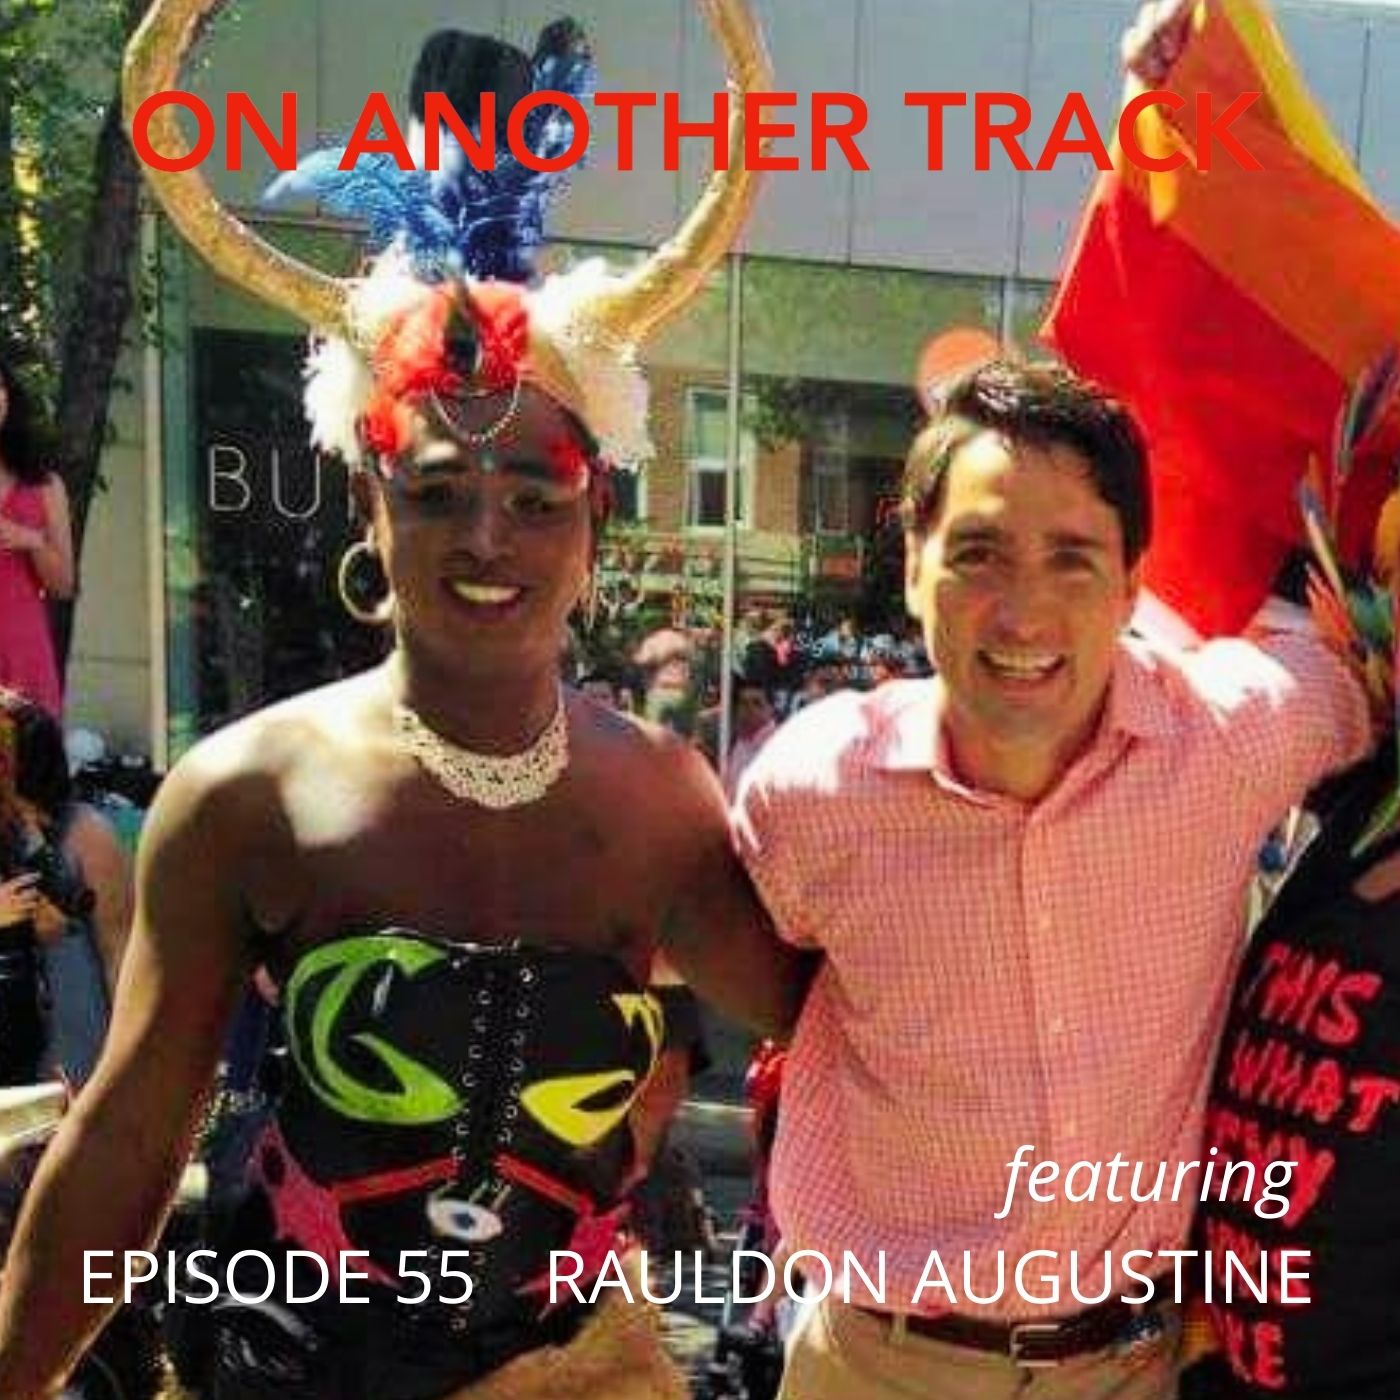 Rauldon Augustine - If he’s good enough for Justin Trudeau then why not us? Image